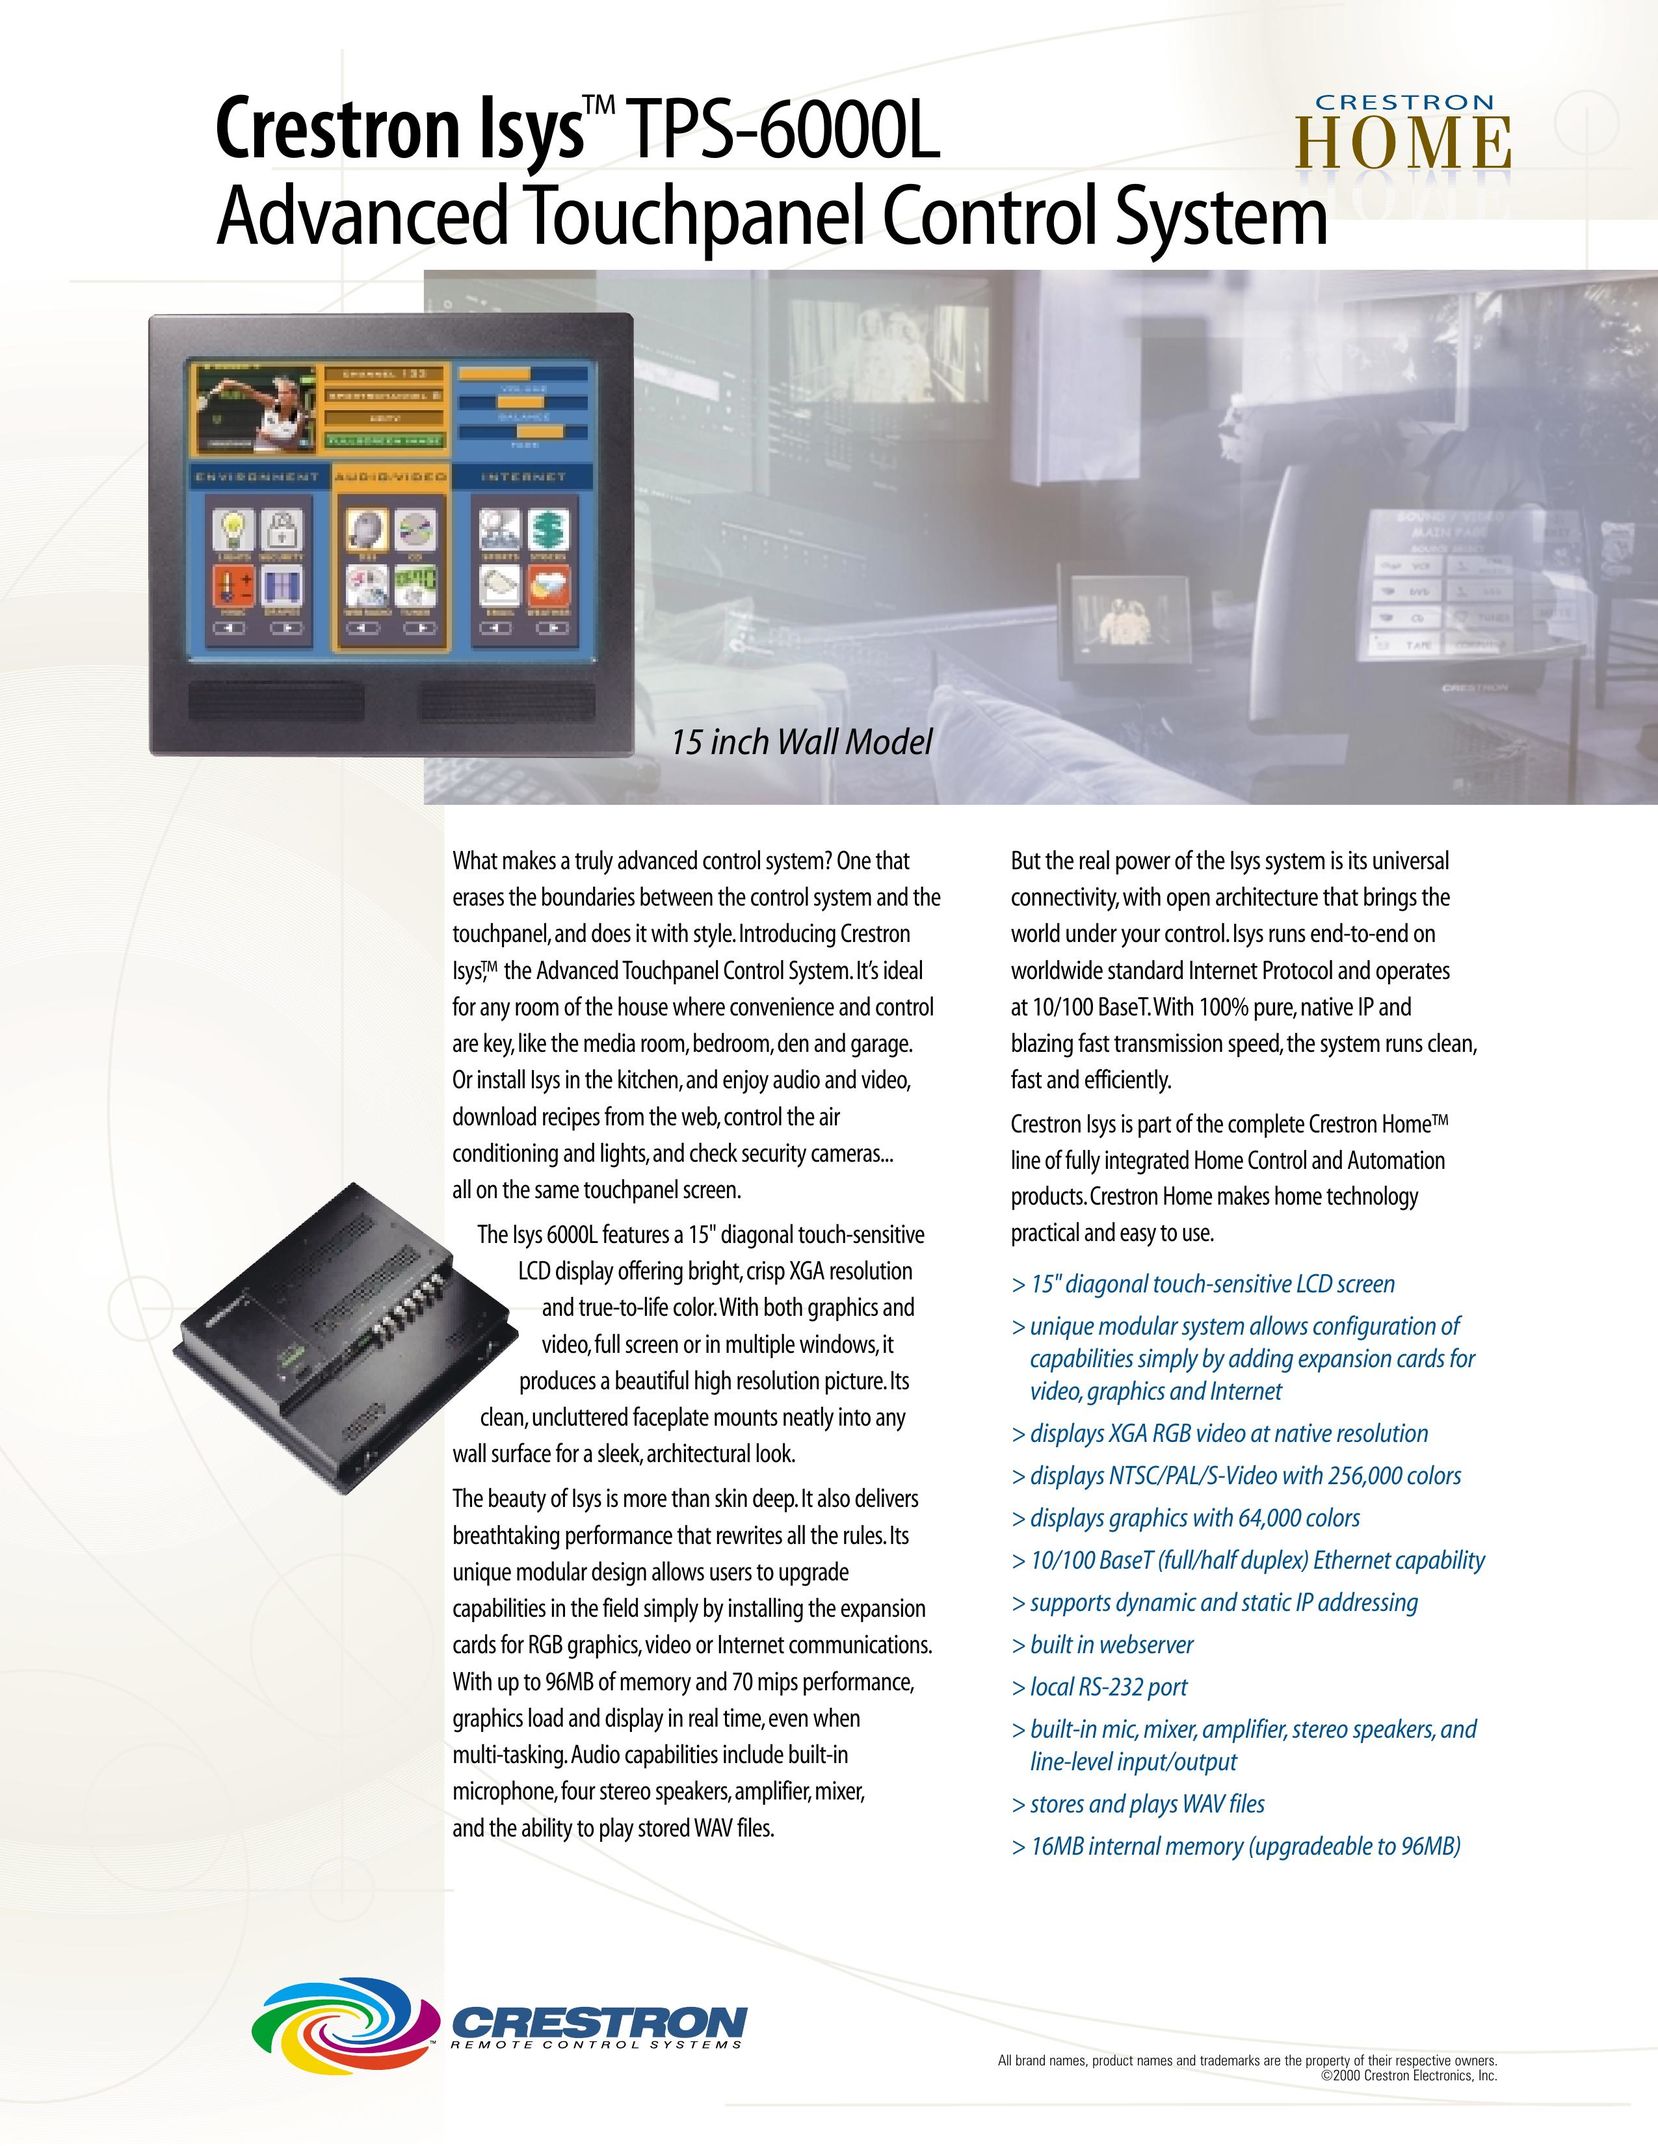 Crestron electronic TPS 6000L Universal Remote User Manual